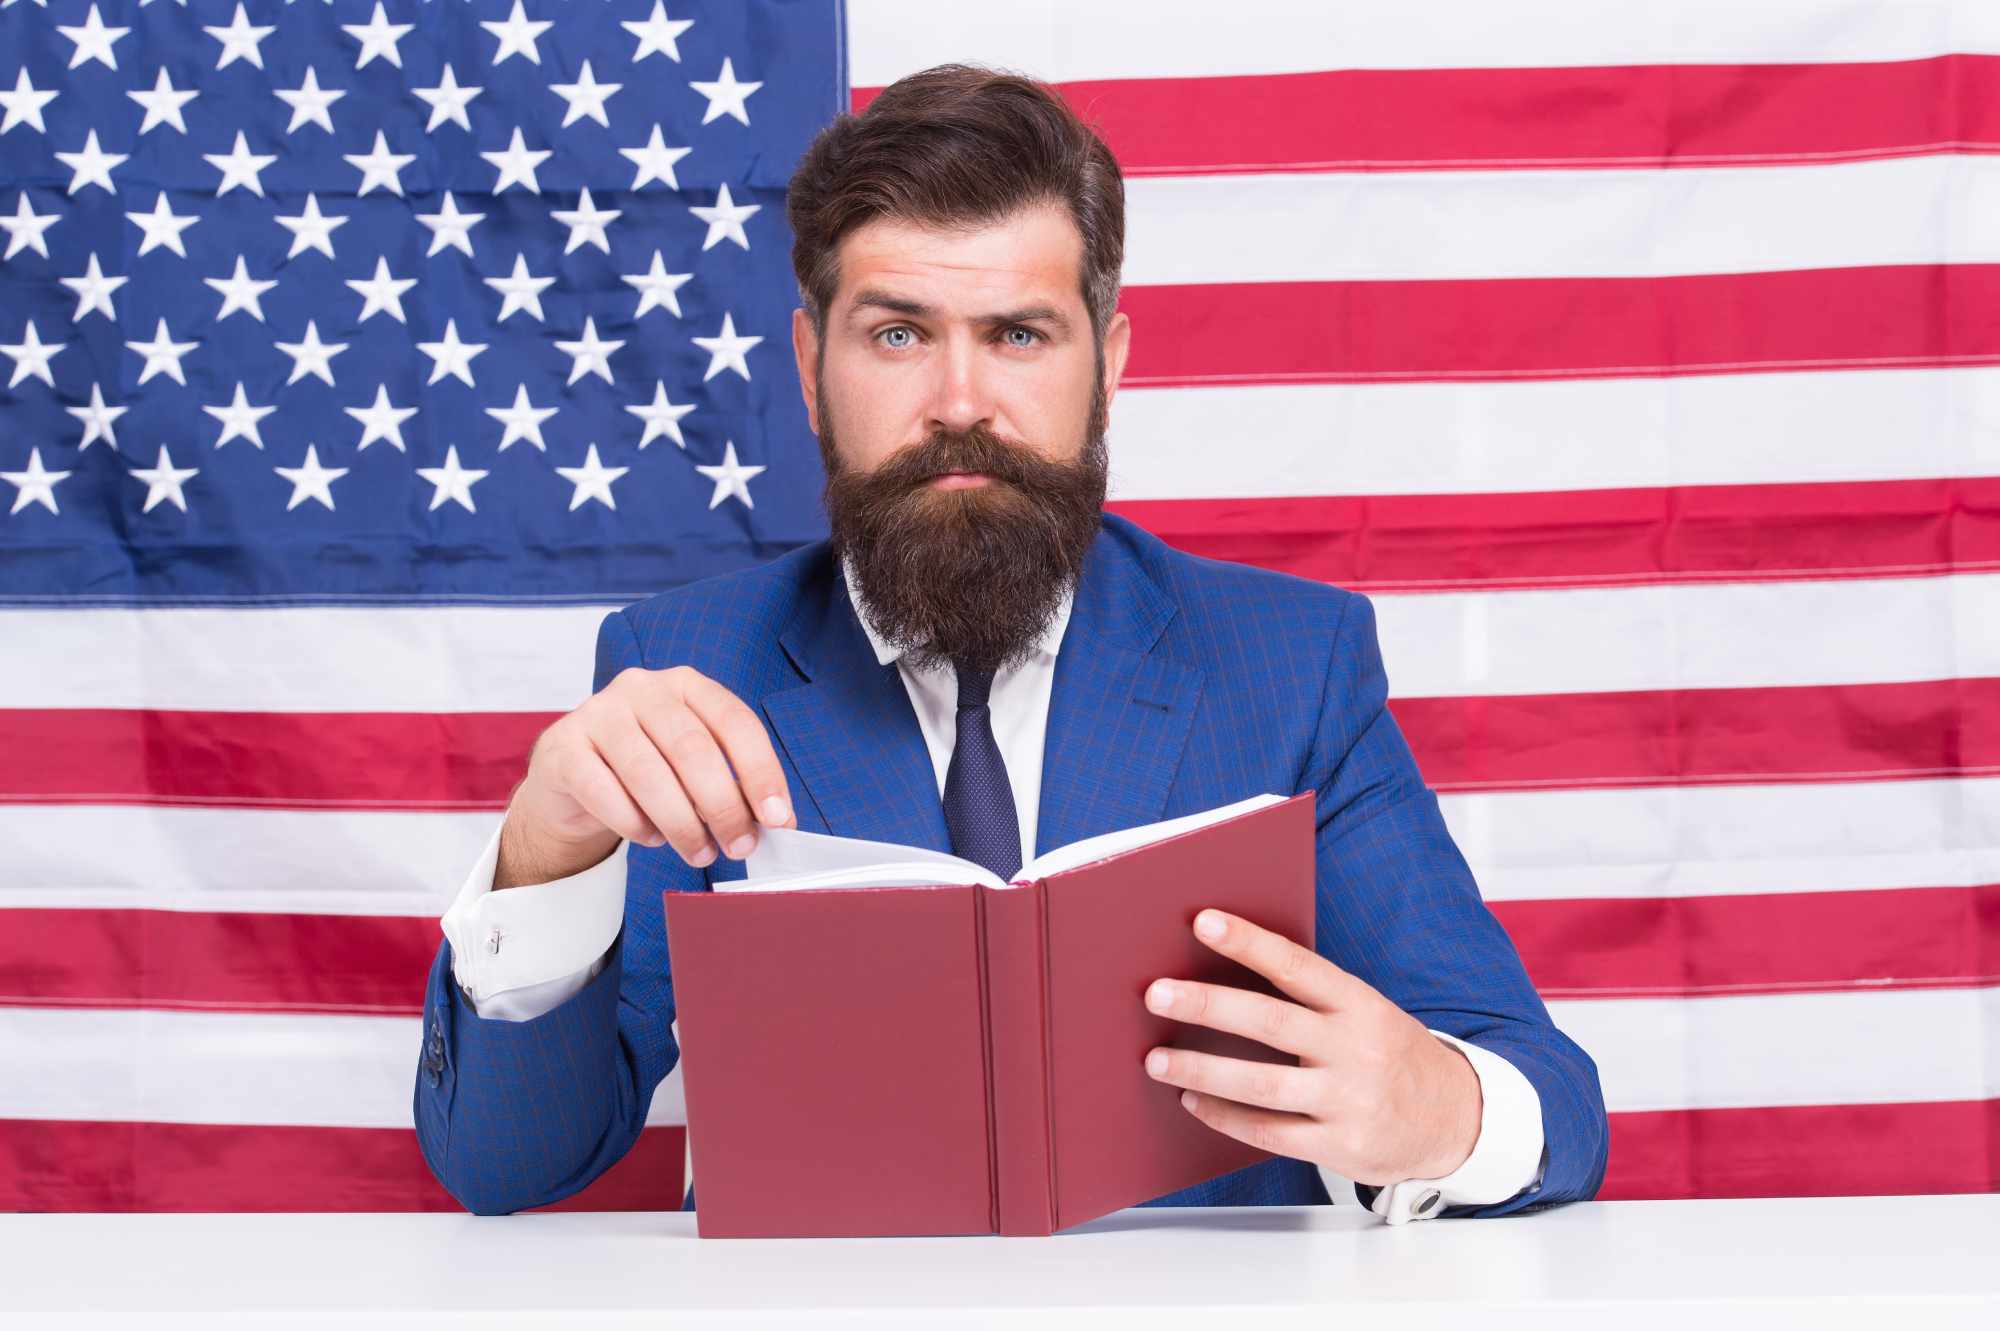 Man reading book with American flag behind him